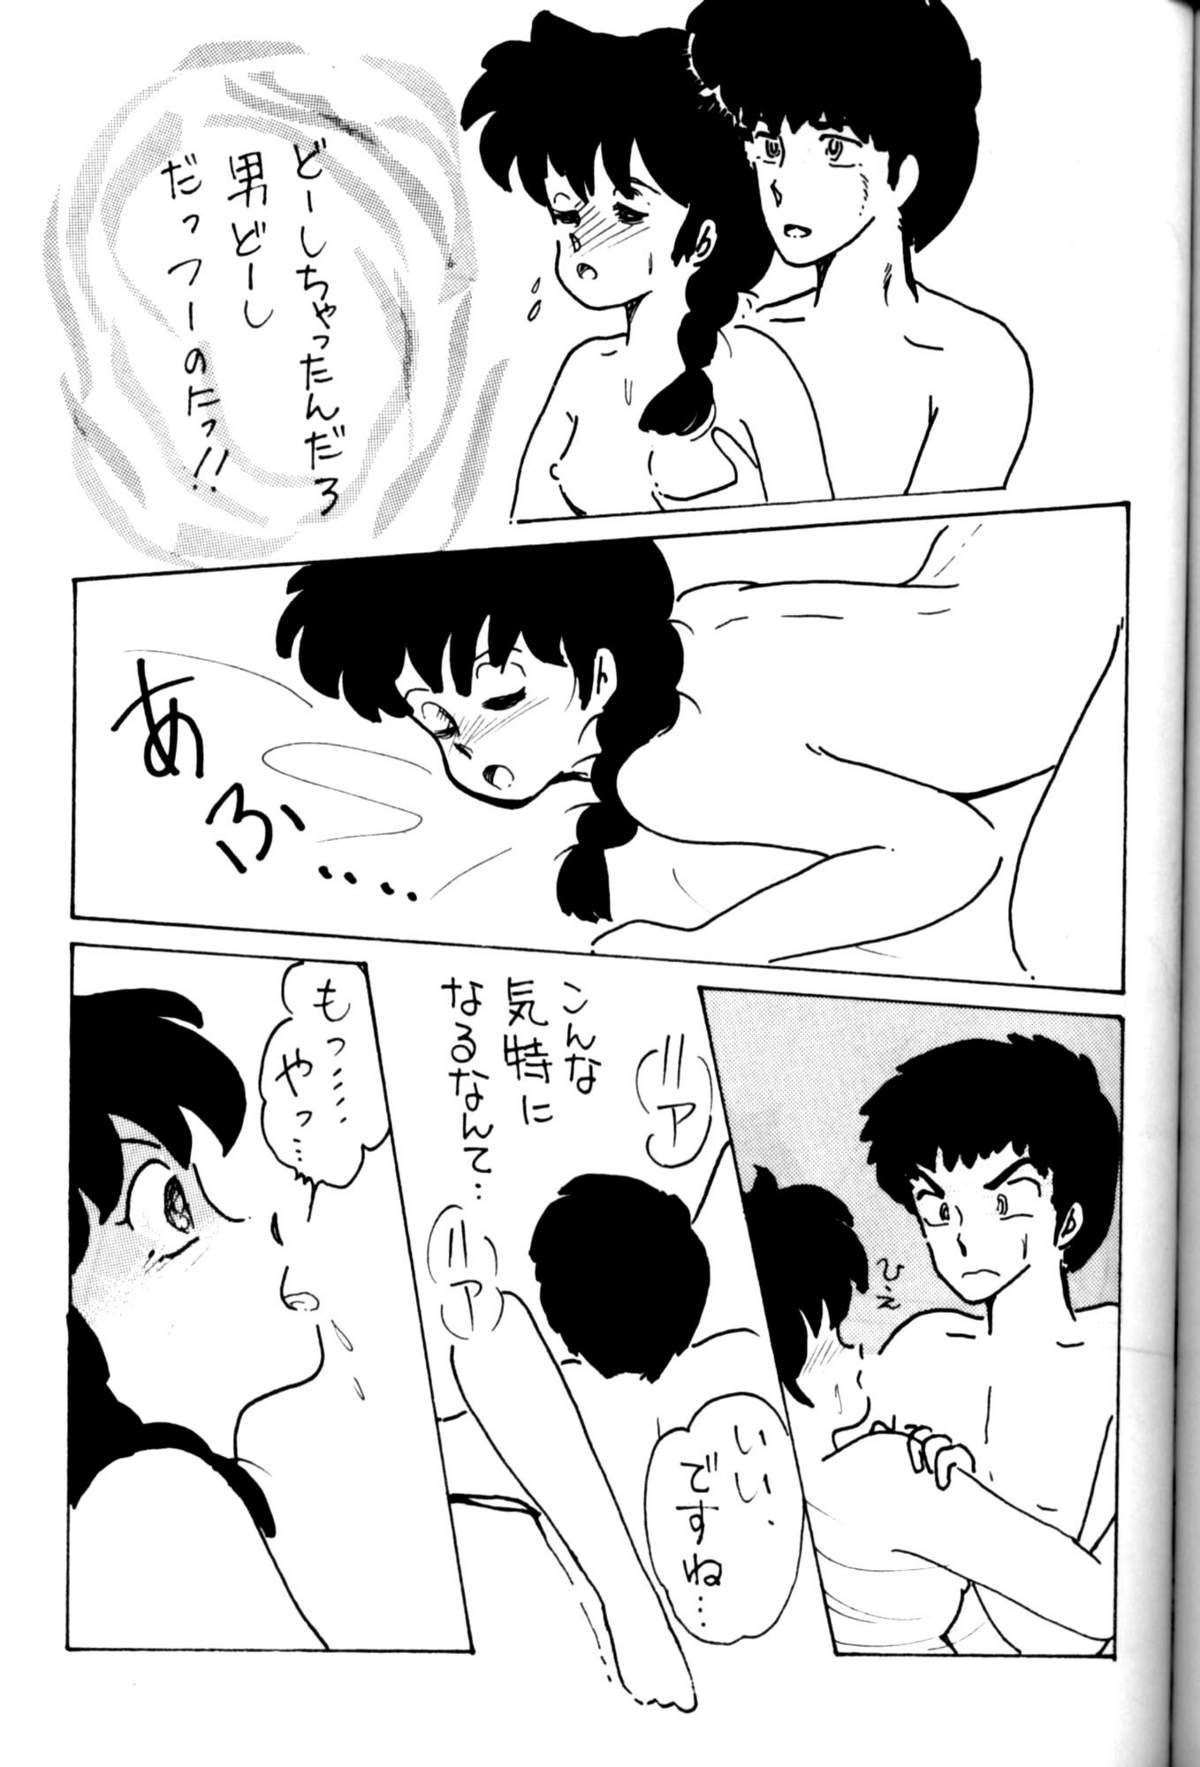 T You (Ranma 1/2) page 26 full